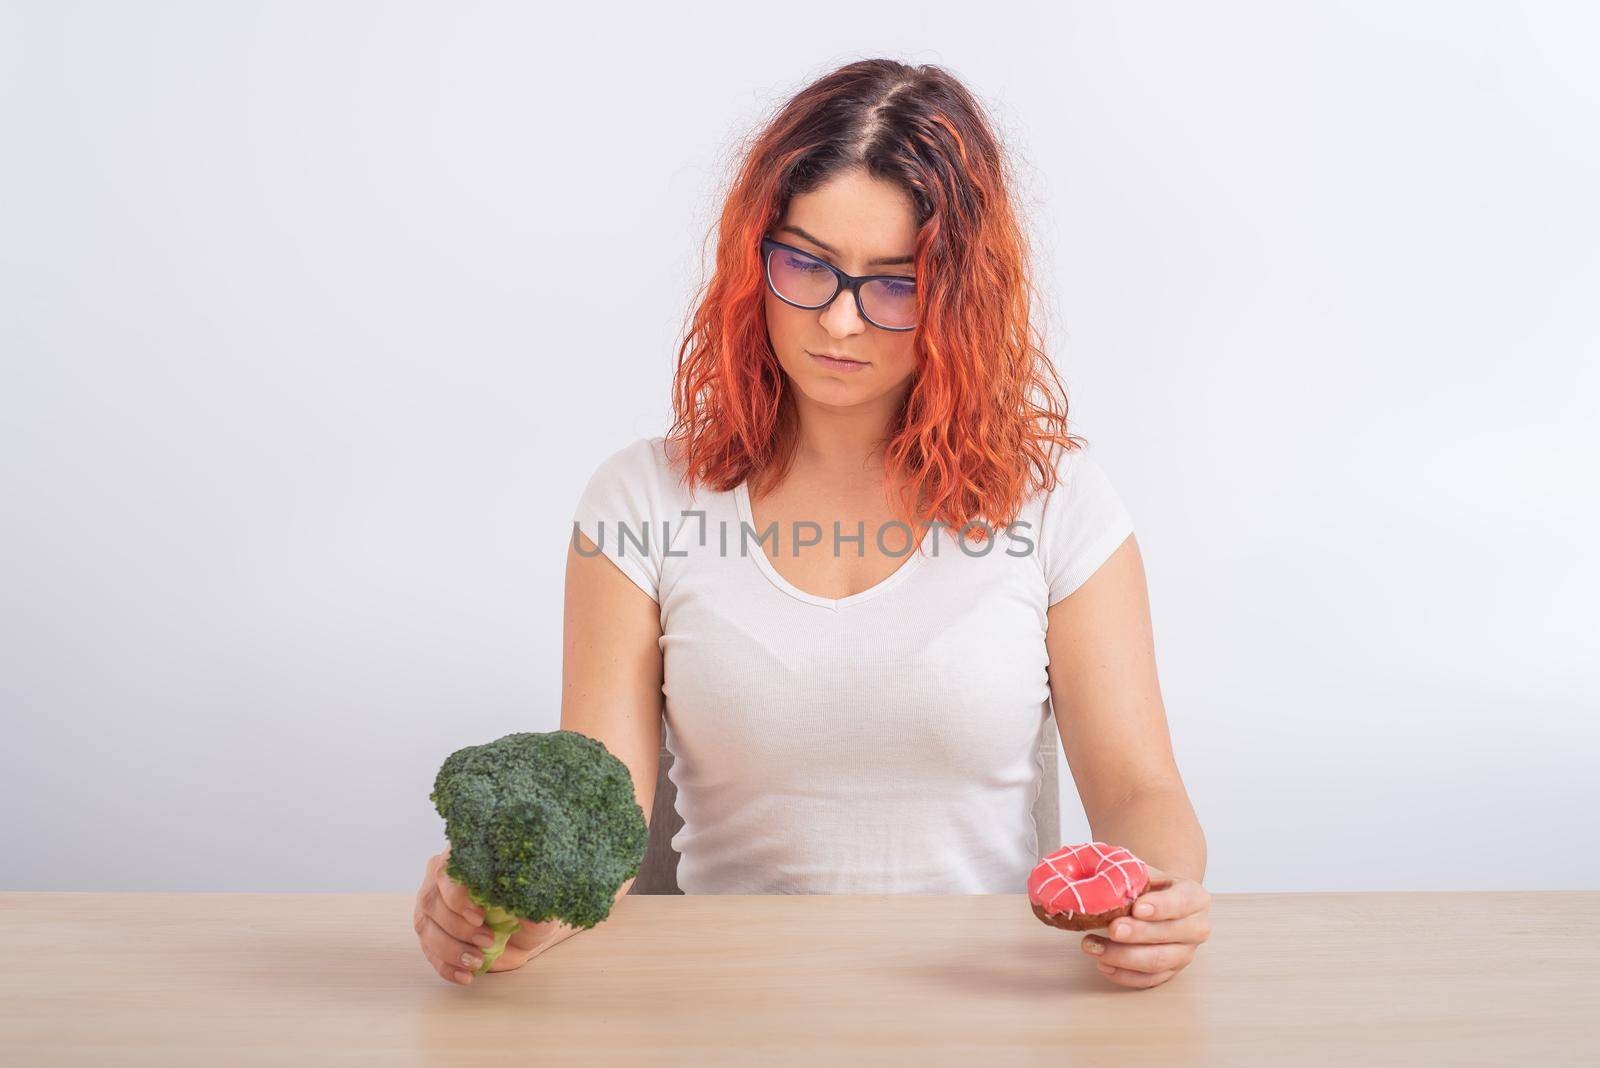 Caucasian woman chooses between vegetables and fast food. Redhead girl holding broccoli and donut on a white background. by mrwed54